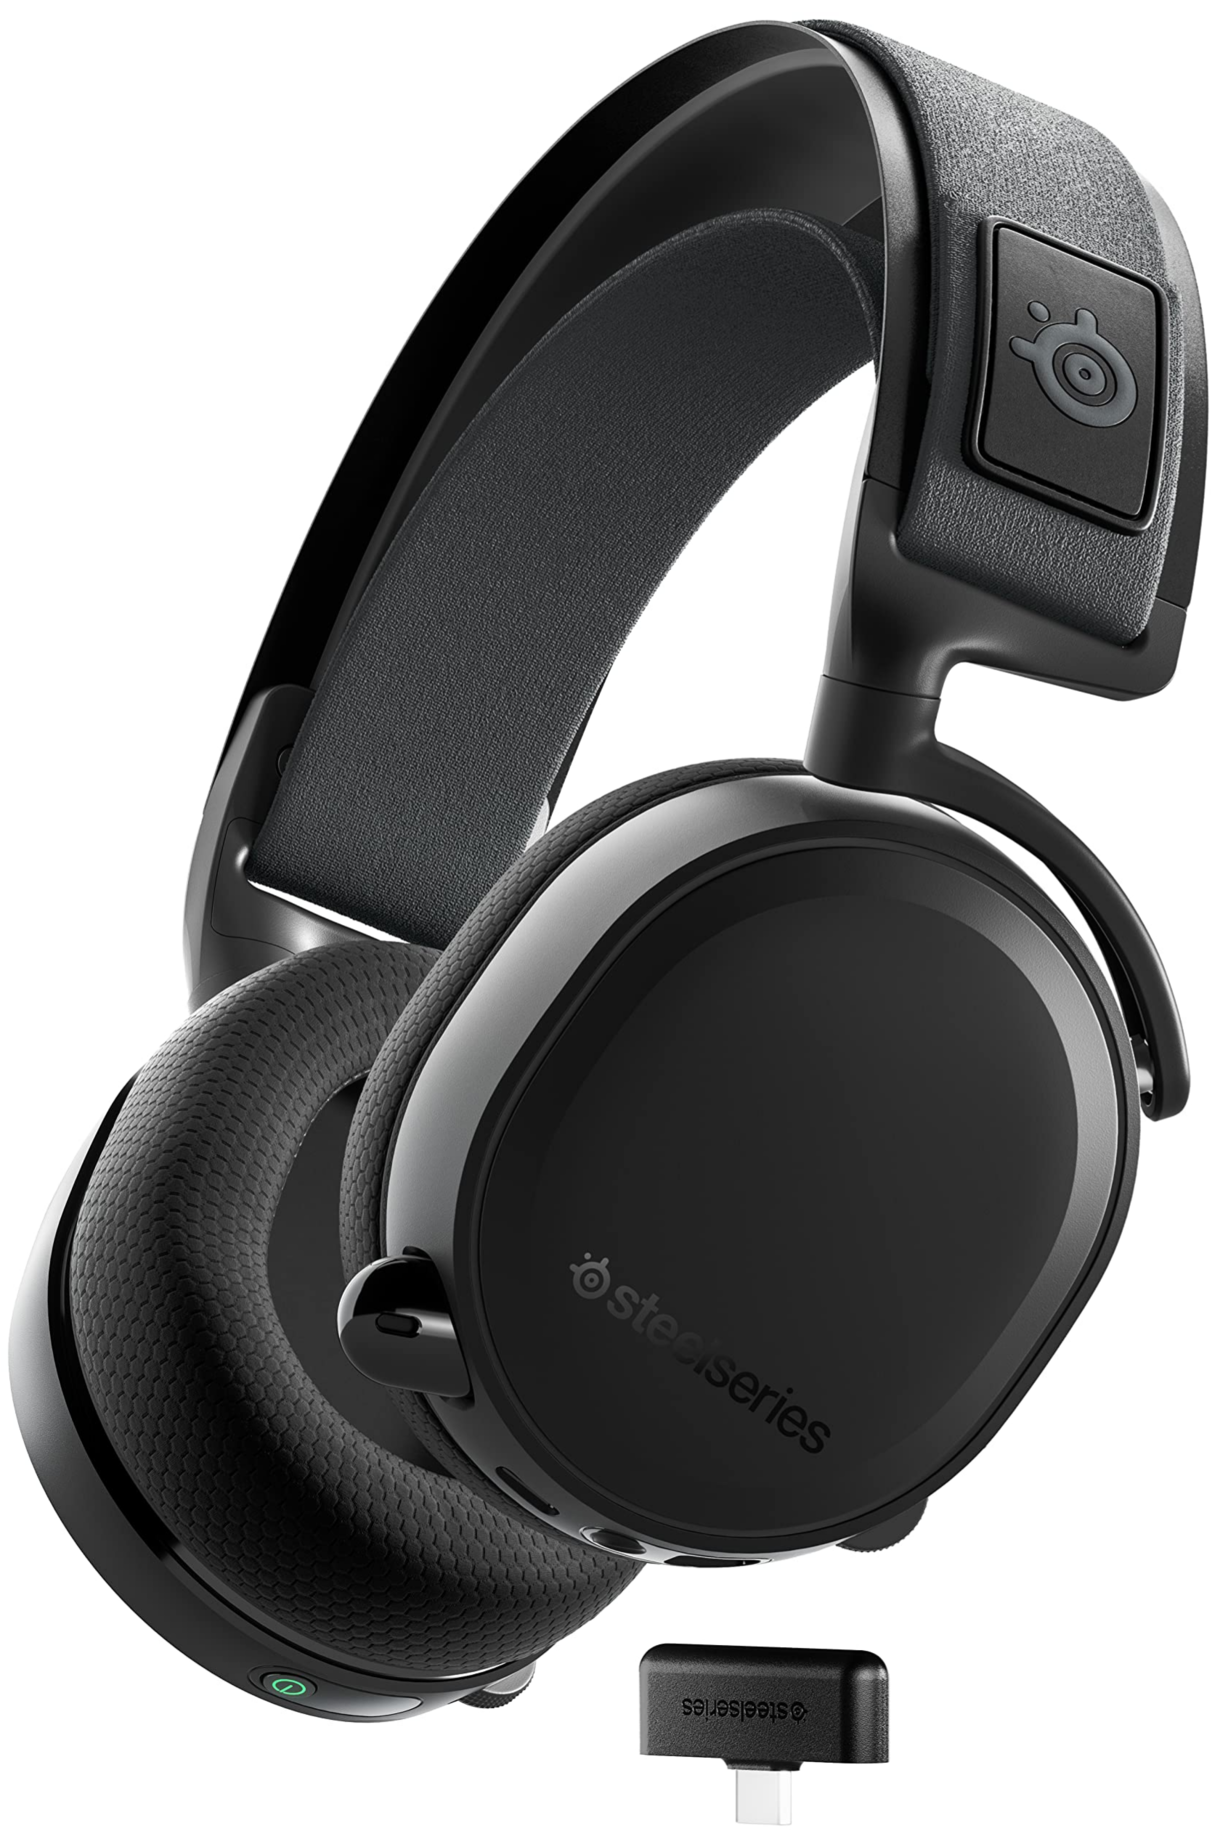 SteelSeries Arctis 7+ Wireless Gaming Headset – Lossless 2.4 GHz – 30 Hour Battery Life – USB-C – 7.1 Surround – For PC, PS5, PS4, Mac, Android and Switch - Black - $139 at Amazon